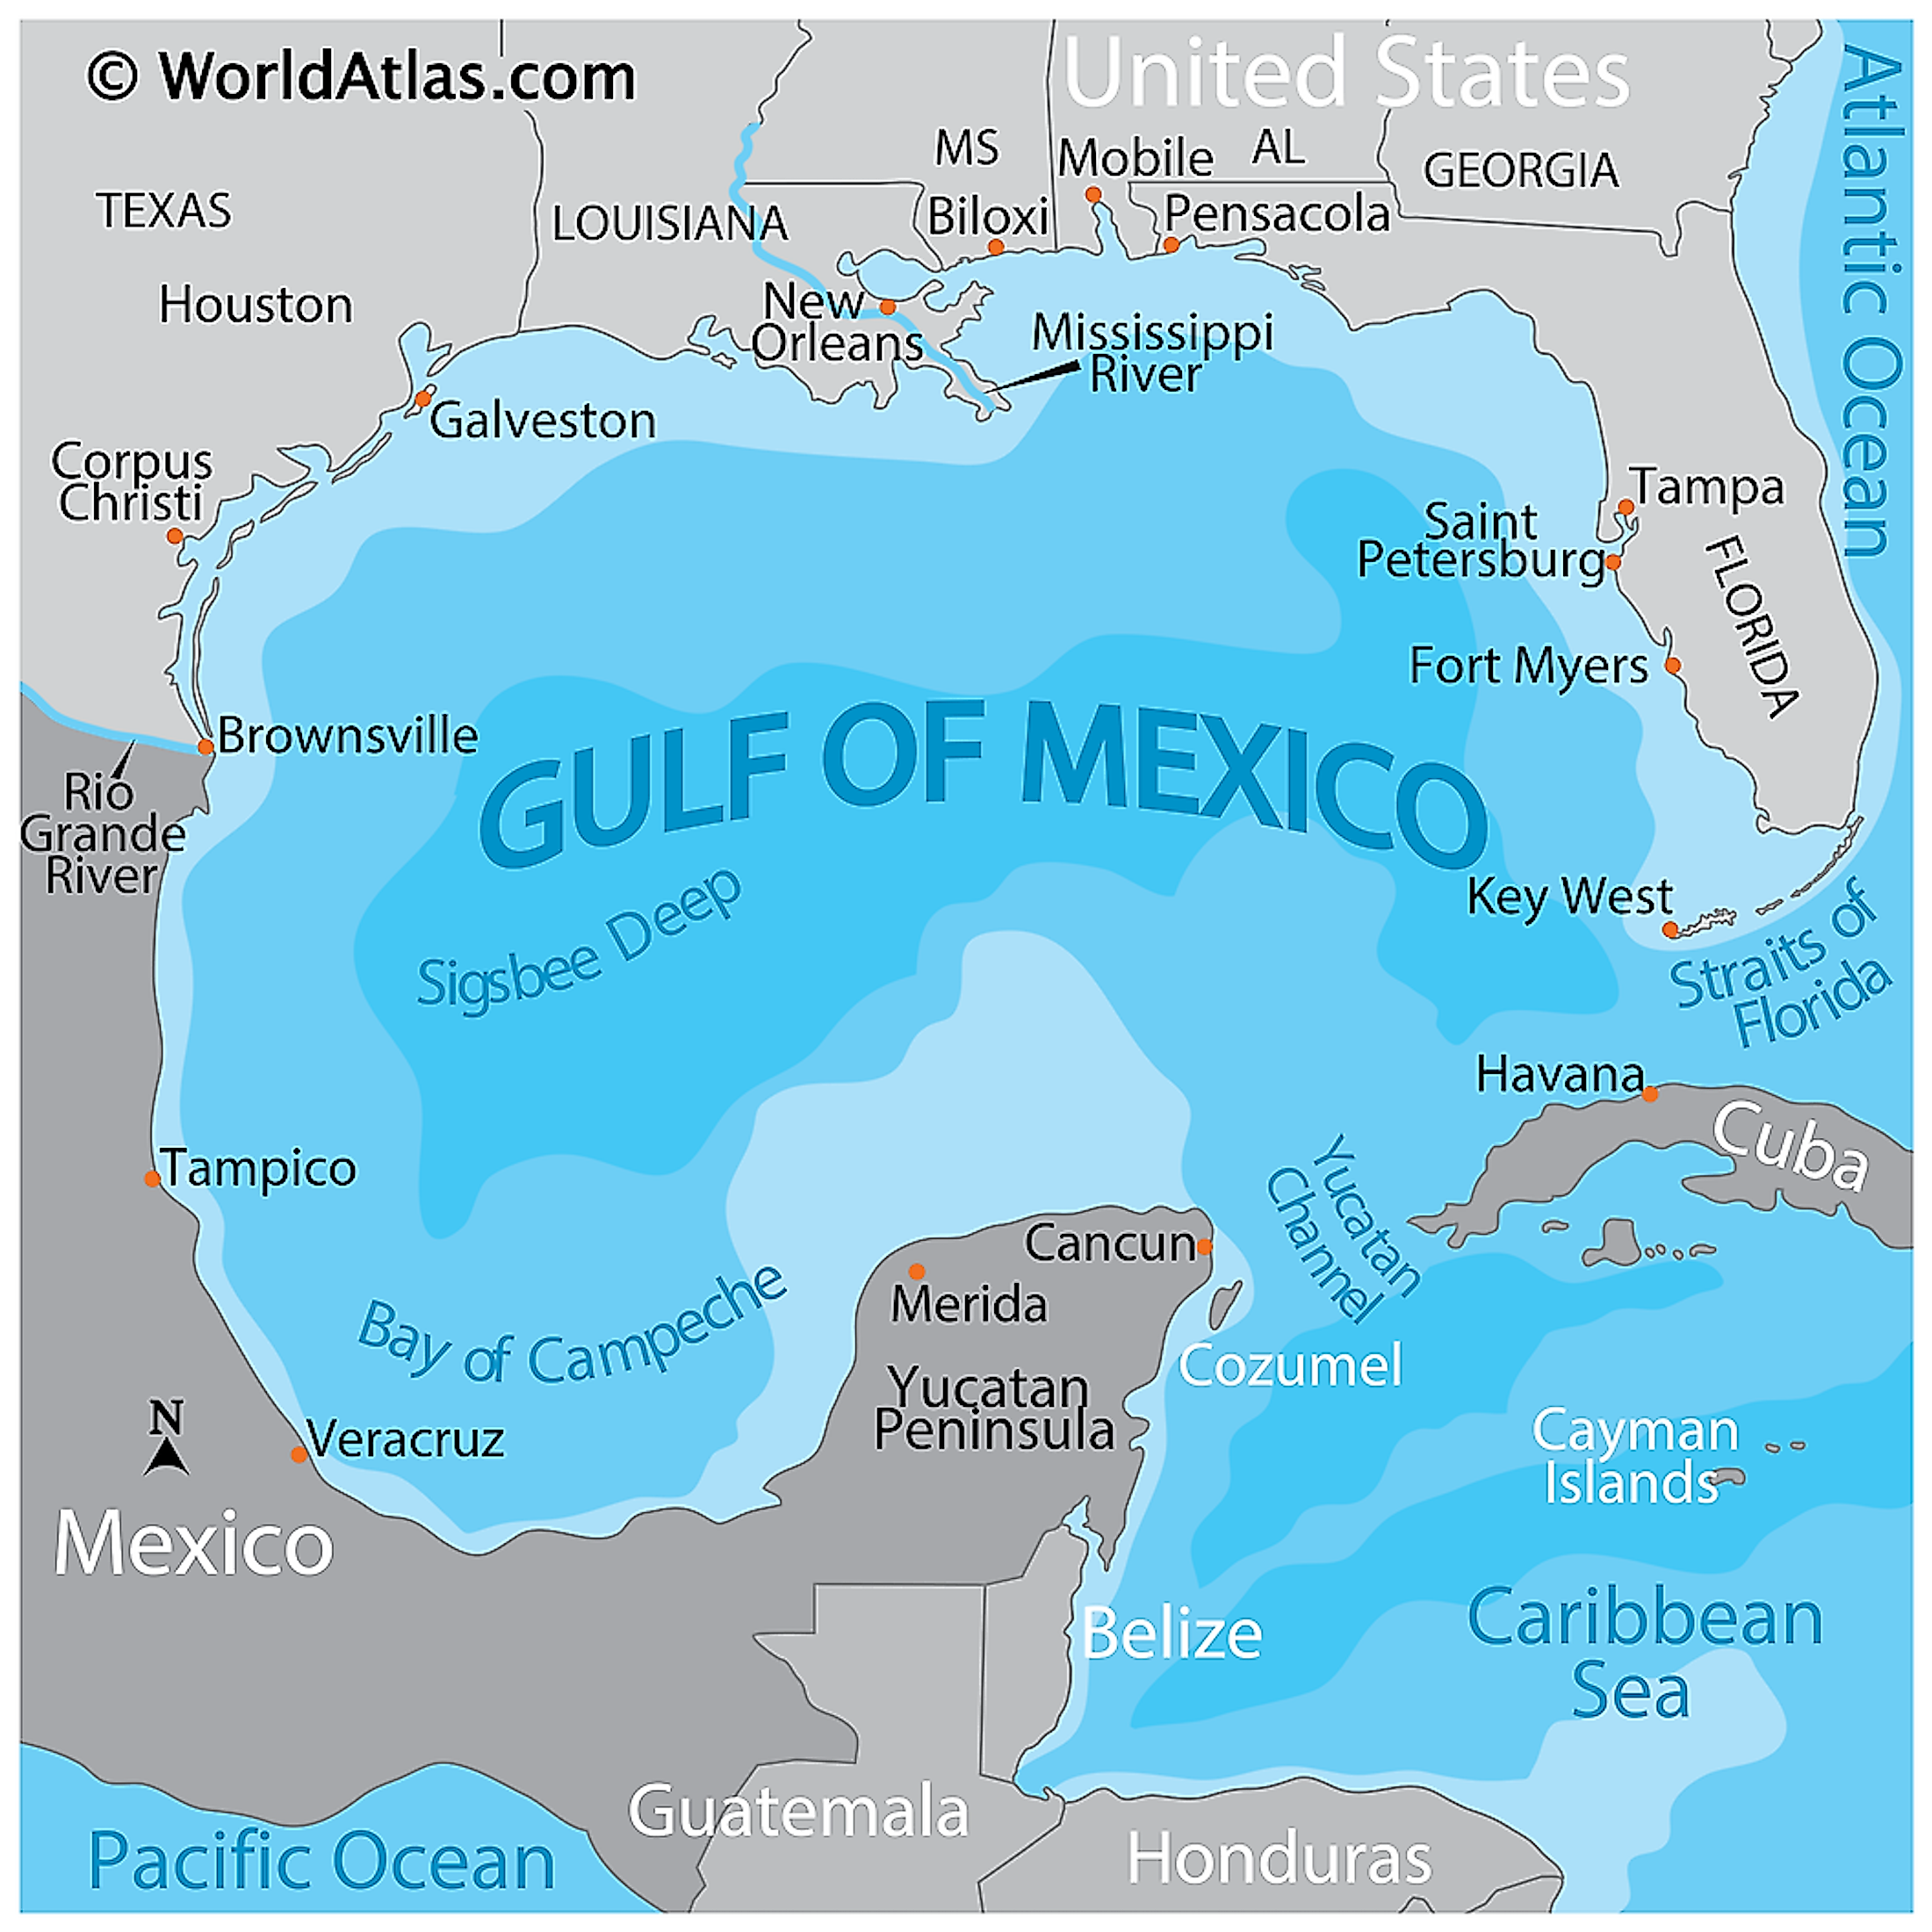 Gulf of Mexico map.